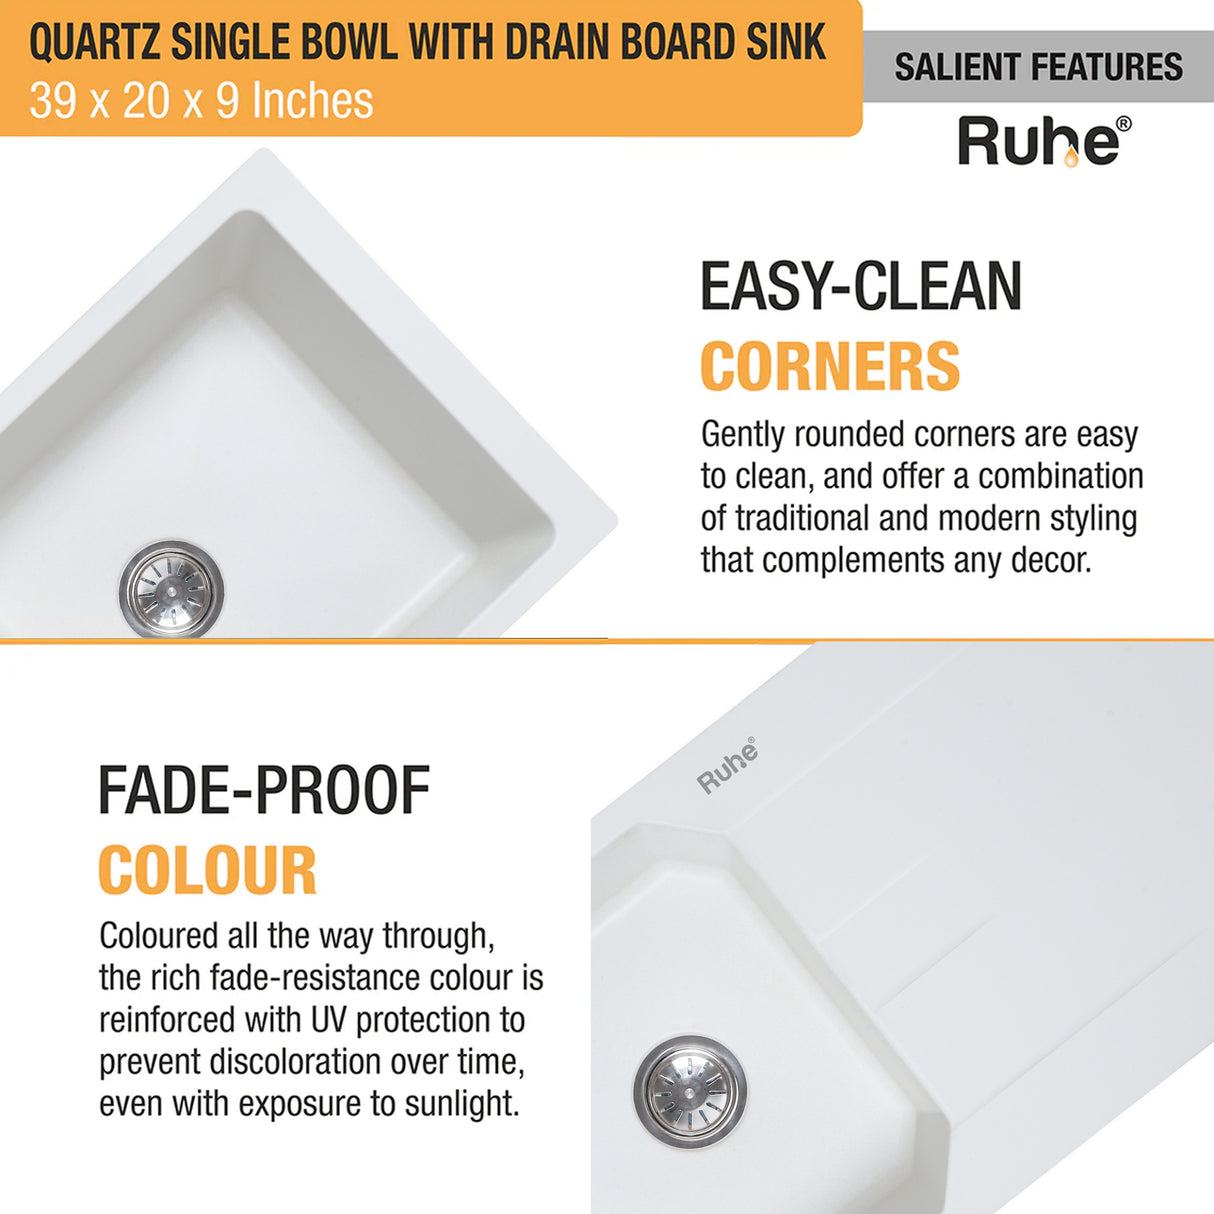 Quartz Single Bowl with Drainboard Kitchen Sink - Crystal White (39 x 20 x 9 inches) - by Ruhe®